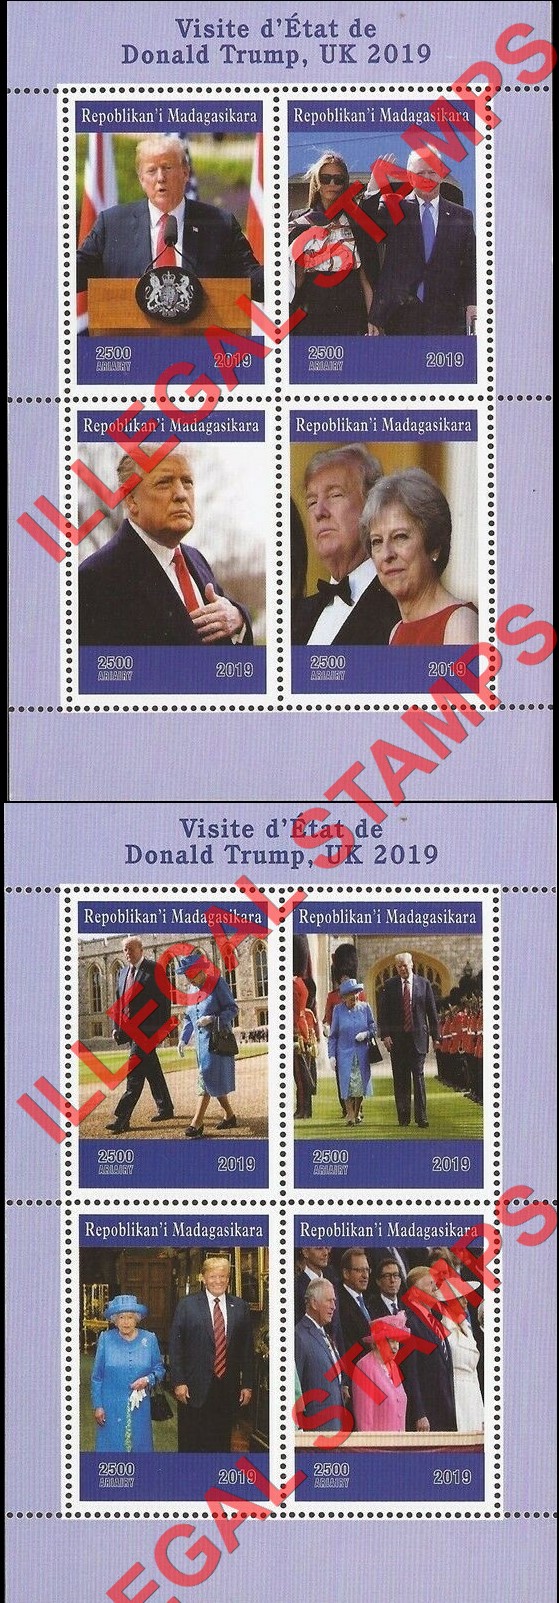 Madagascar 2019 Donald Trump Visit to the United Kingdom Illegal Stamp Souvenir Sheets of 4